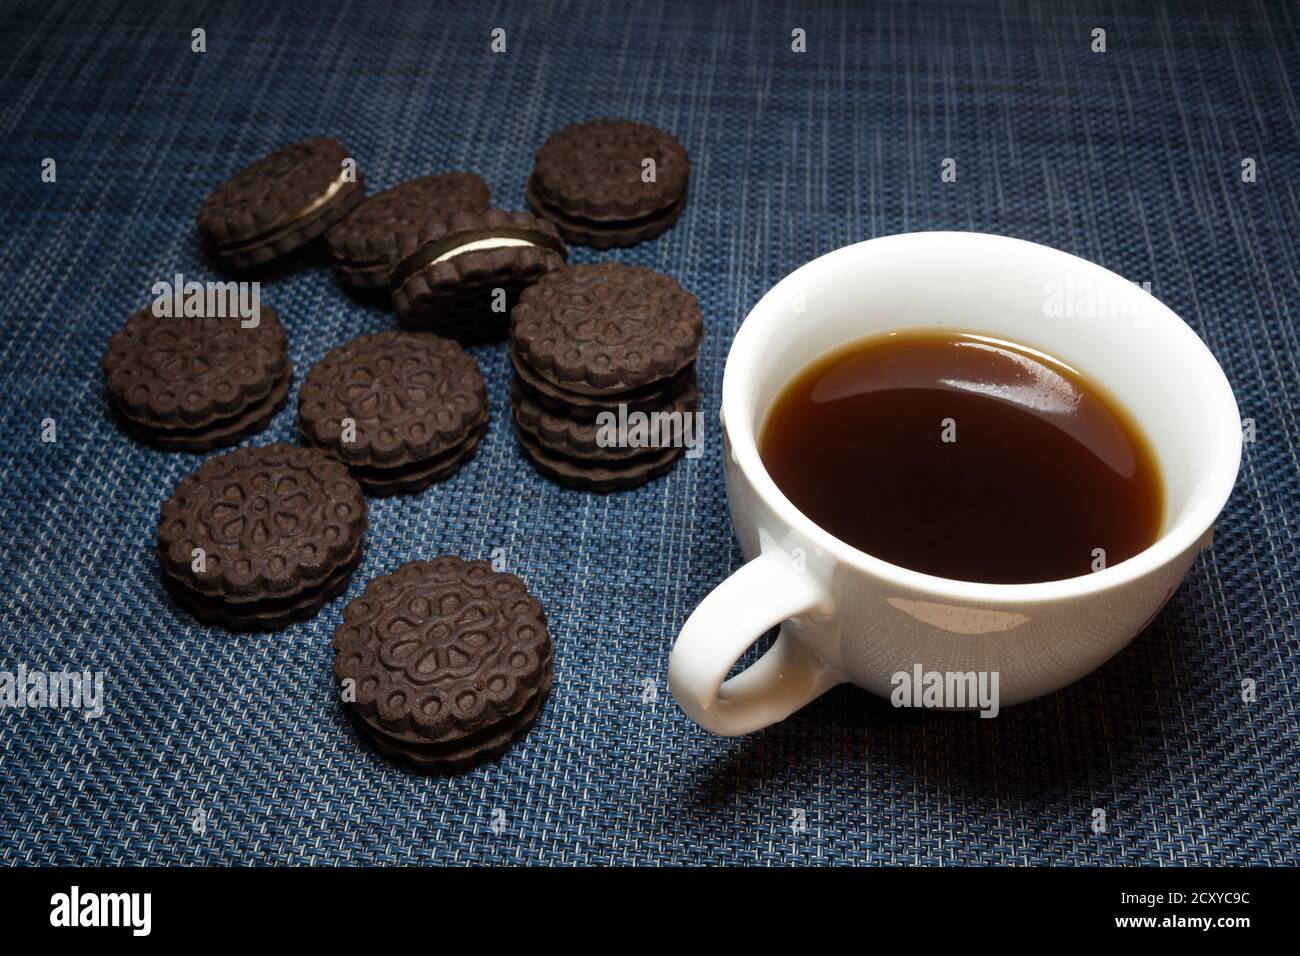 White cup of dark coffee and biscuits Stock Photo